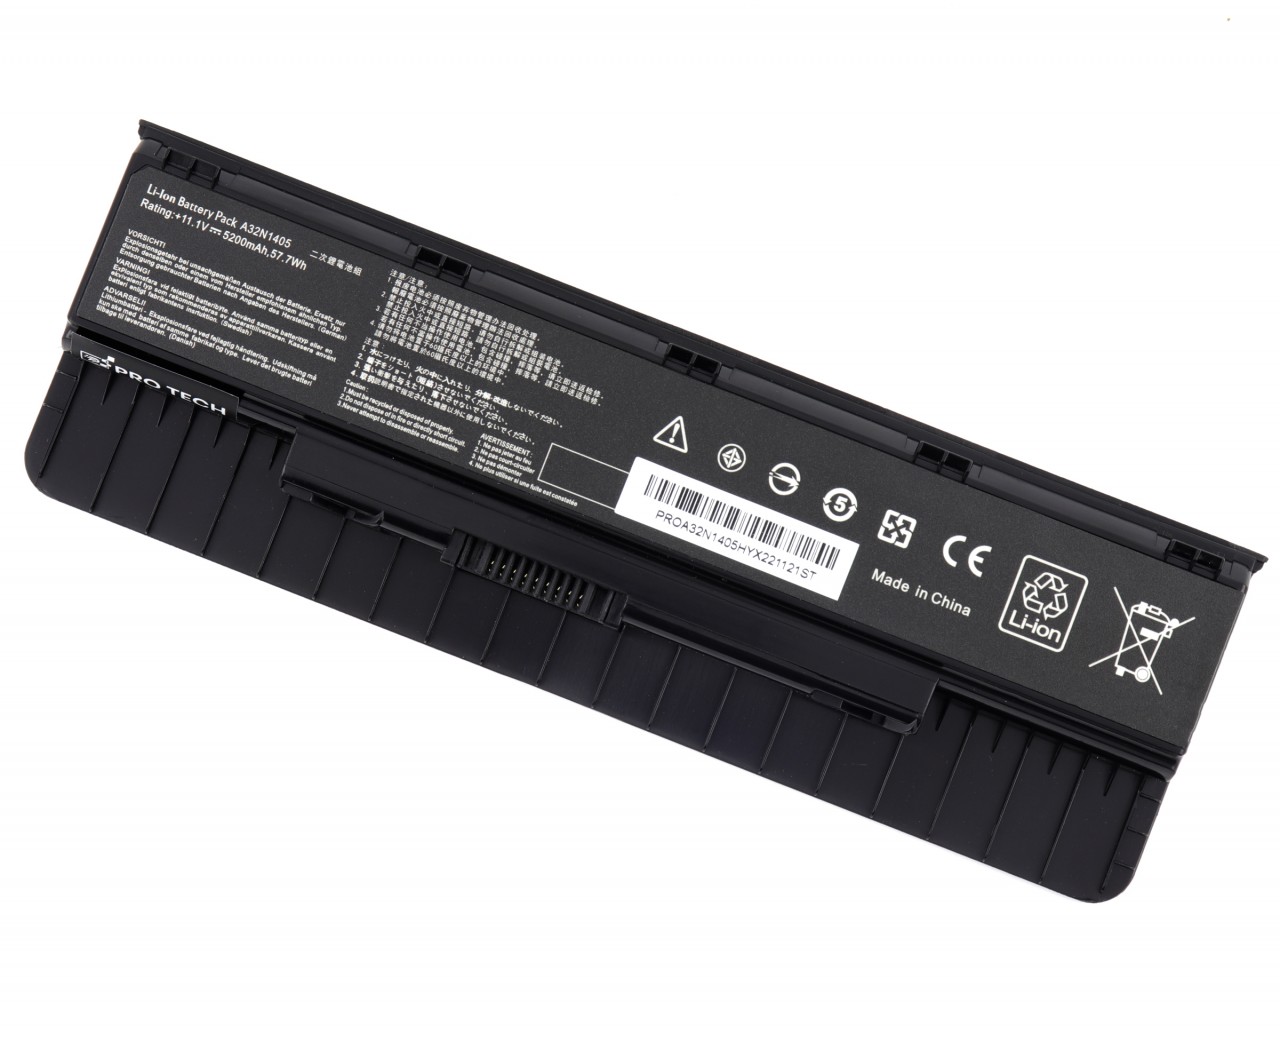 Baterie Asus N76VJ-T5052H 57.7Wh / 5200mAh Protech High Quality Replacement